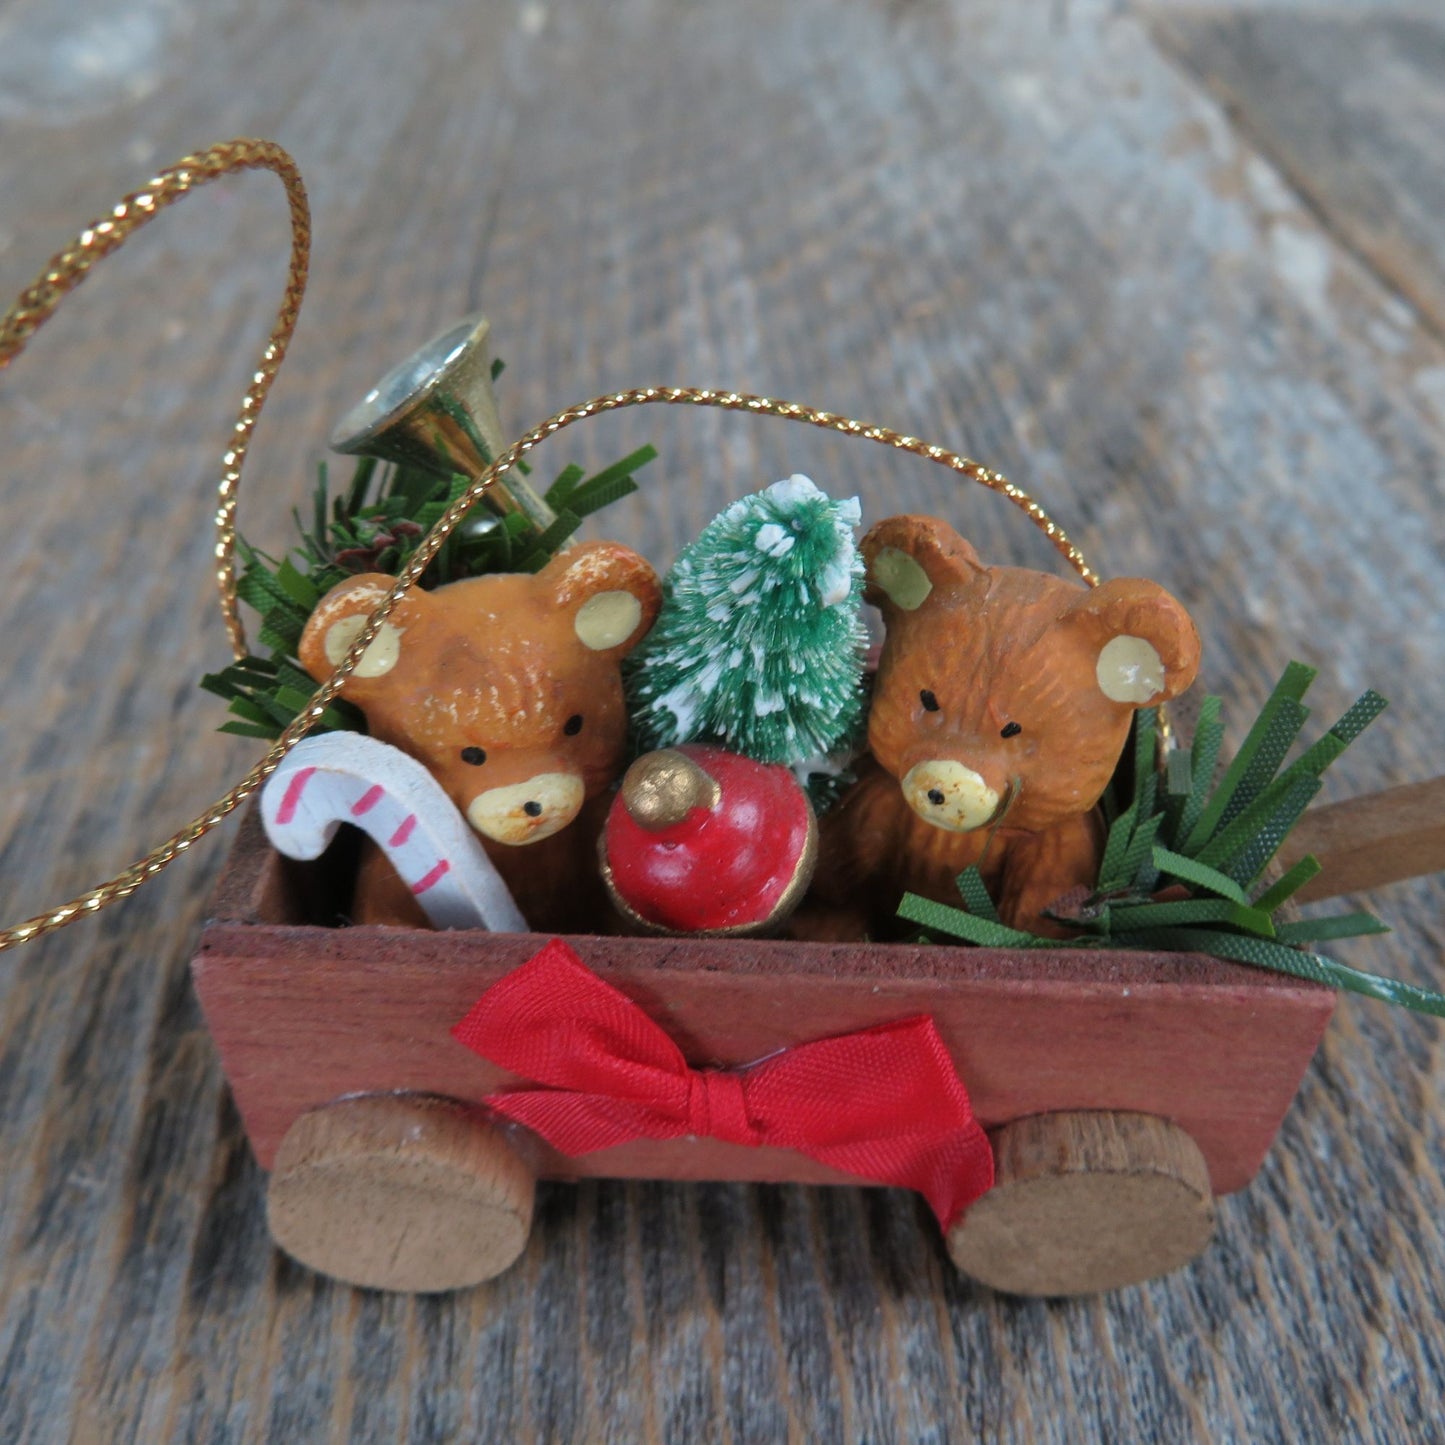 Vintage Wooden Wagon with Teddy Bears Ornament Wood Christmas Red Brush Tree Trumpet